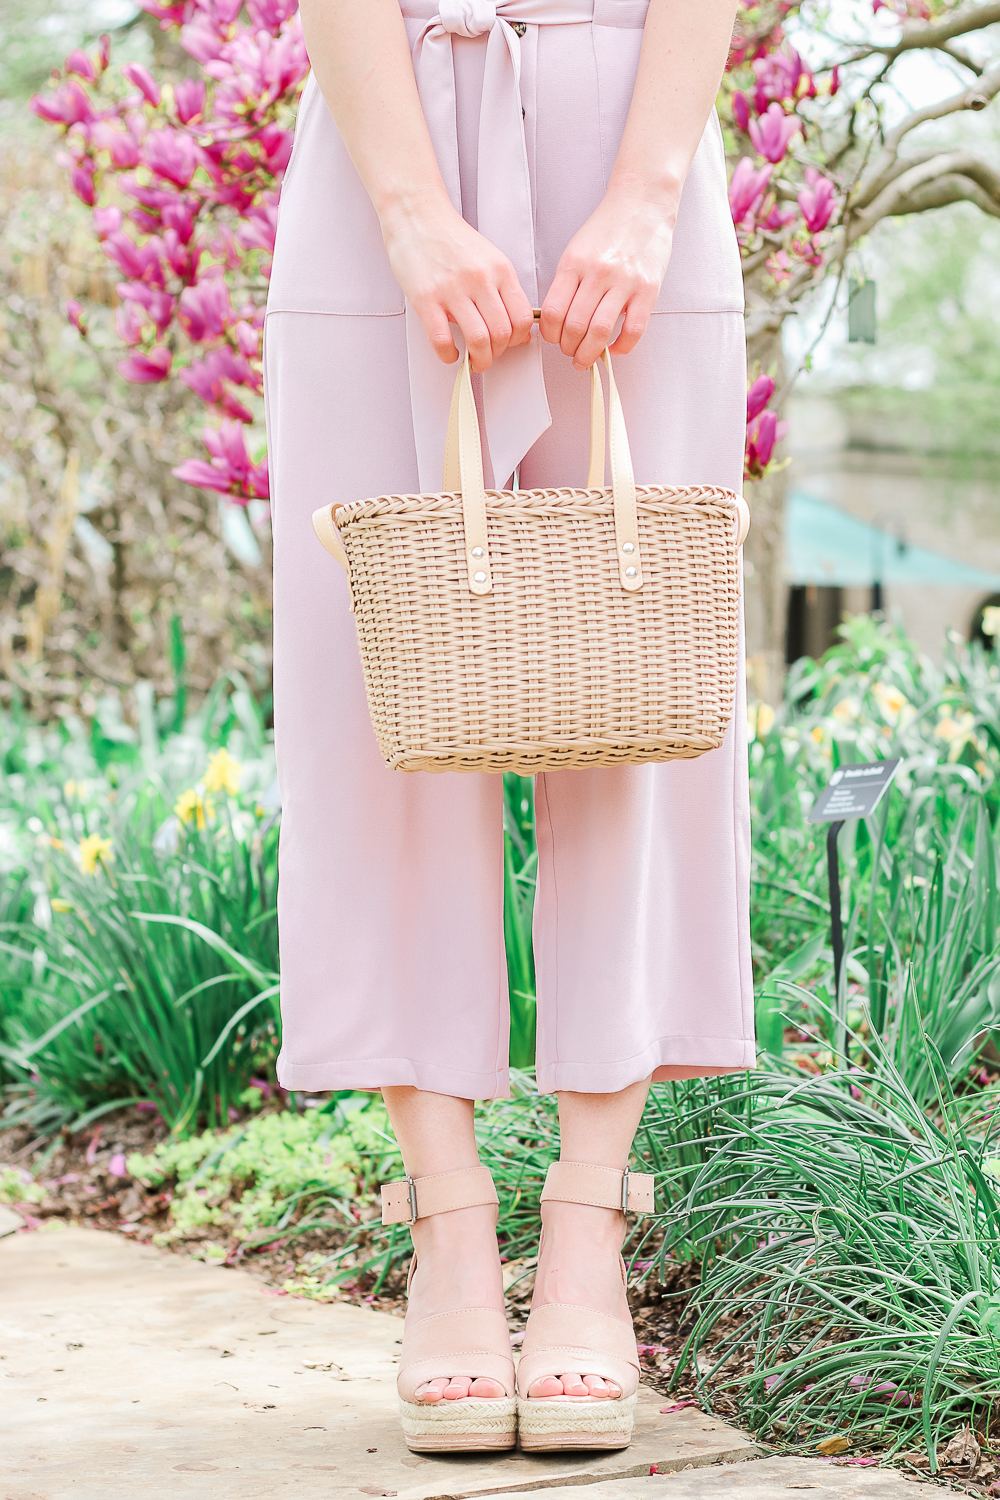 Target Spring Shopping Haul: Top Fashion and Beauty Finds by affordable fashion blogger Stephanie Ziajka from Diary of a Debutante, Target A New Day Sleeveless V-Neck Button Front Jumper, Who What Wear Basket Crossbody Bag, Women's Caroline Microsuede Ankle Strap Espadrille Wedge